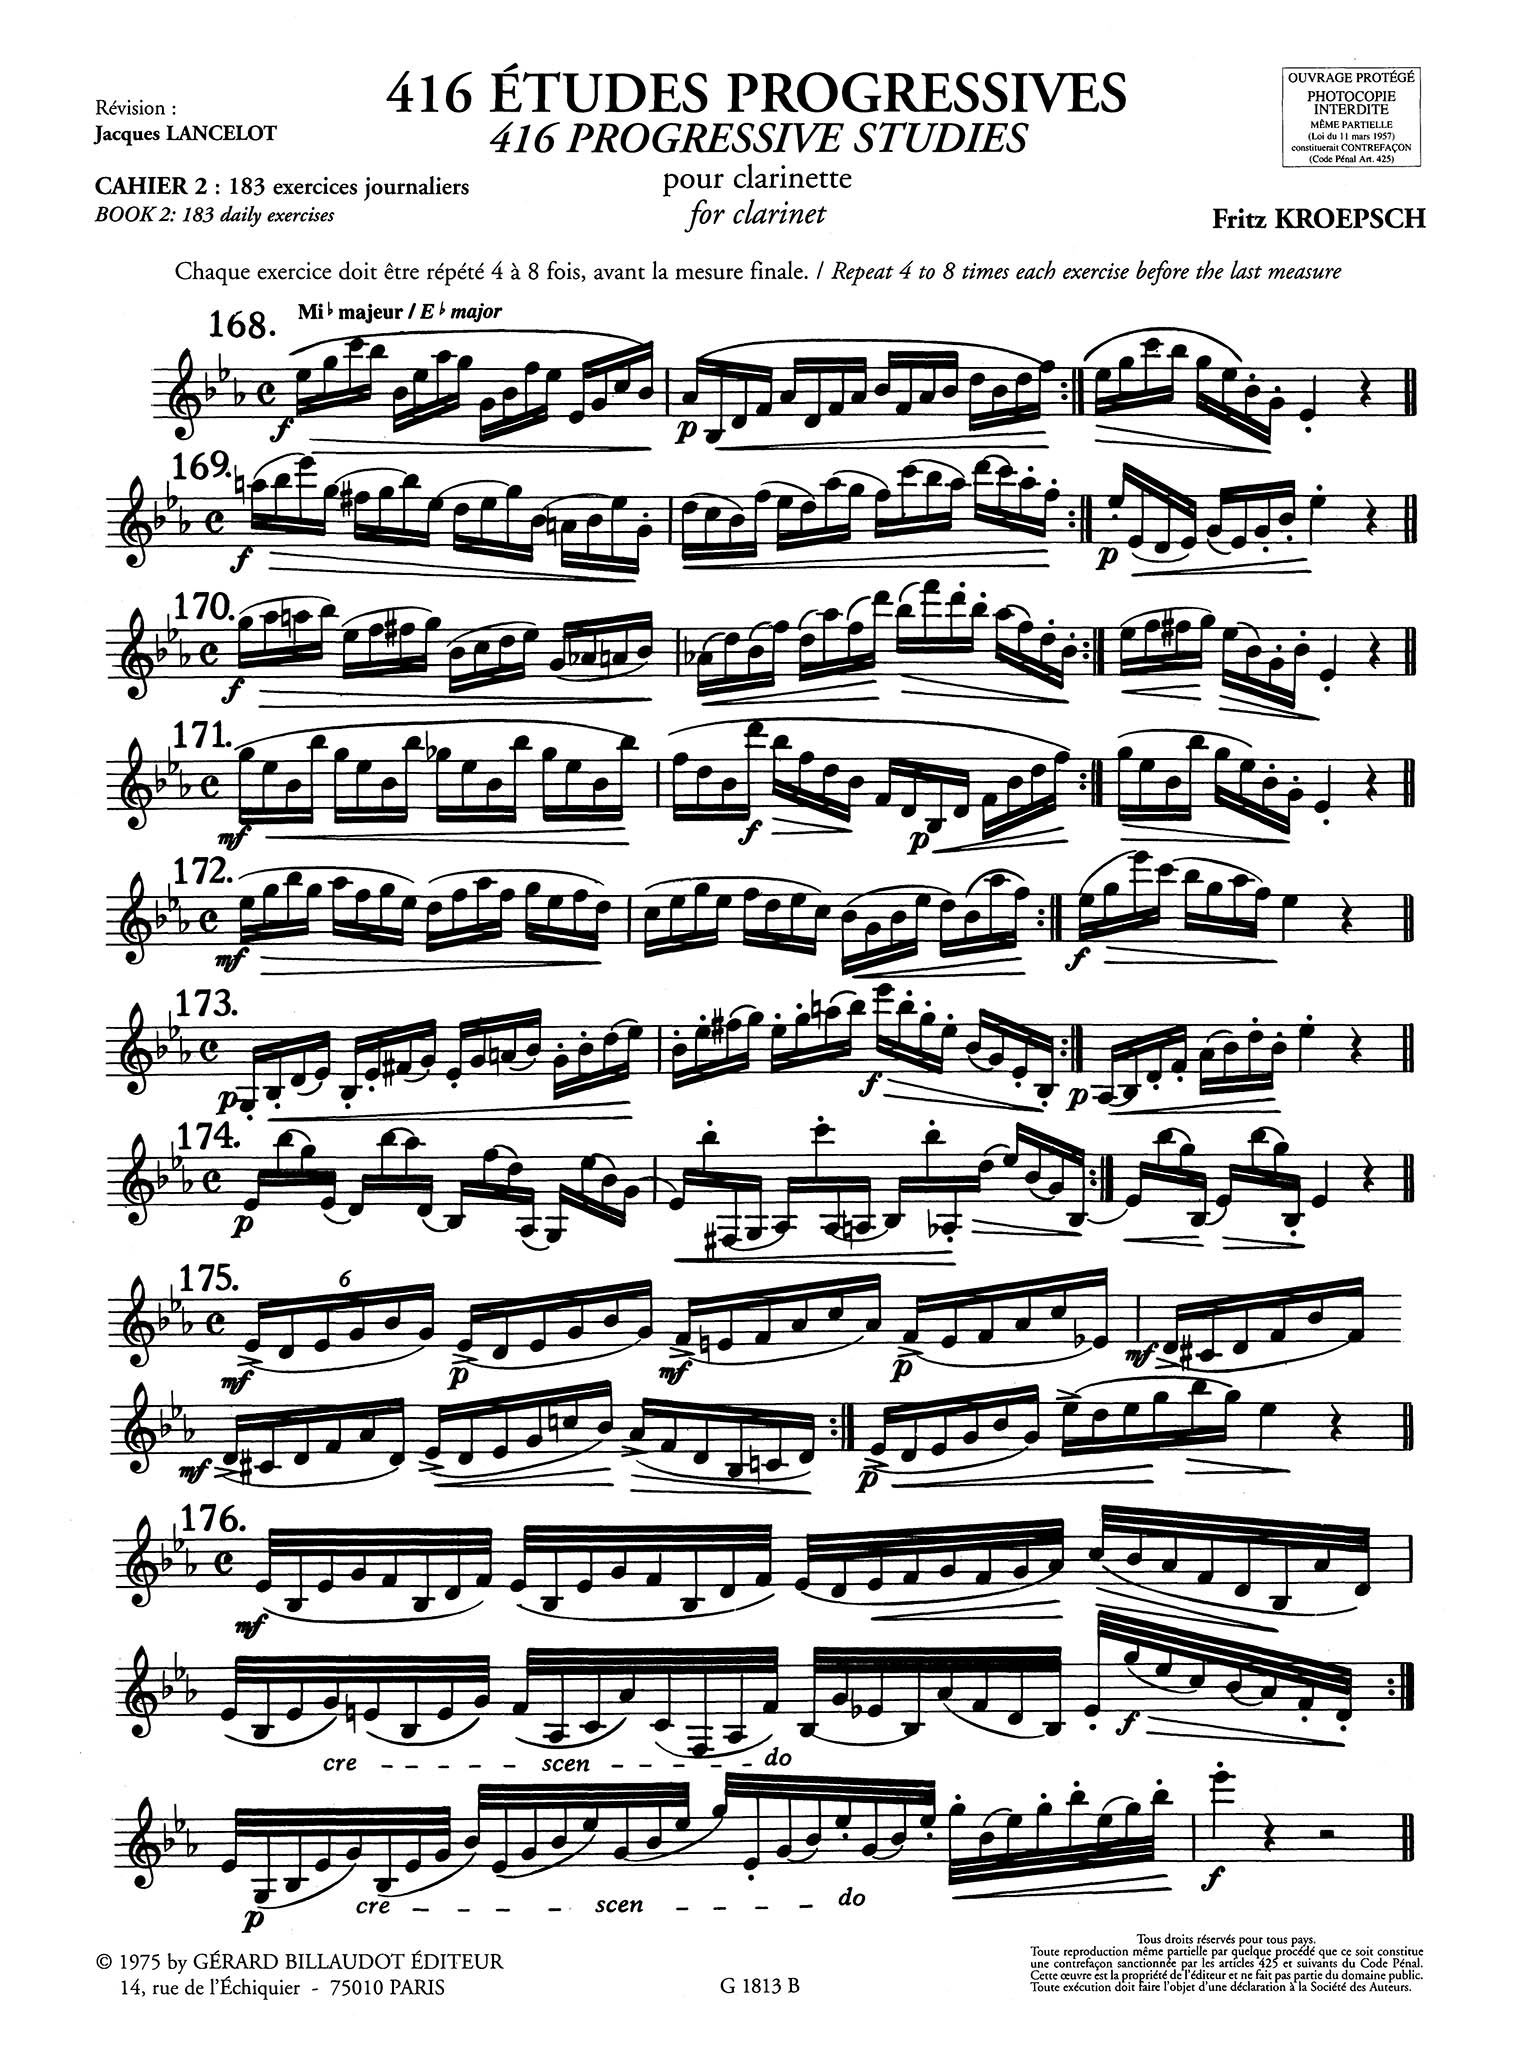 416 Progressive Studies for Clarinet, Book 2: 183 Daily Exercises Page 2